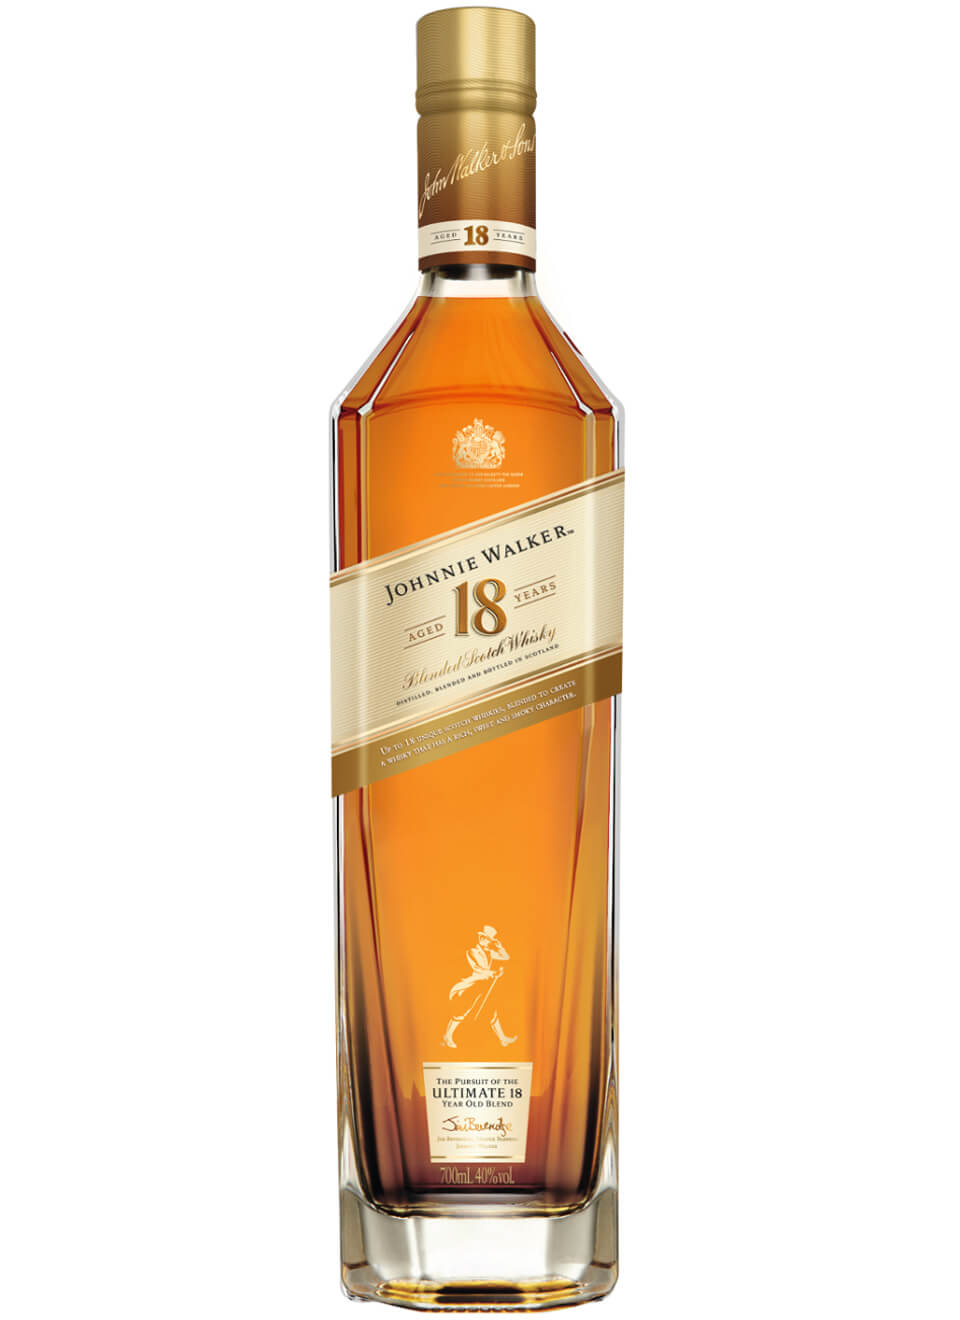 Johnnie Walker Aged 18 Years Blended Scotch Whisky 0,7 L